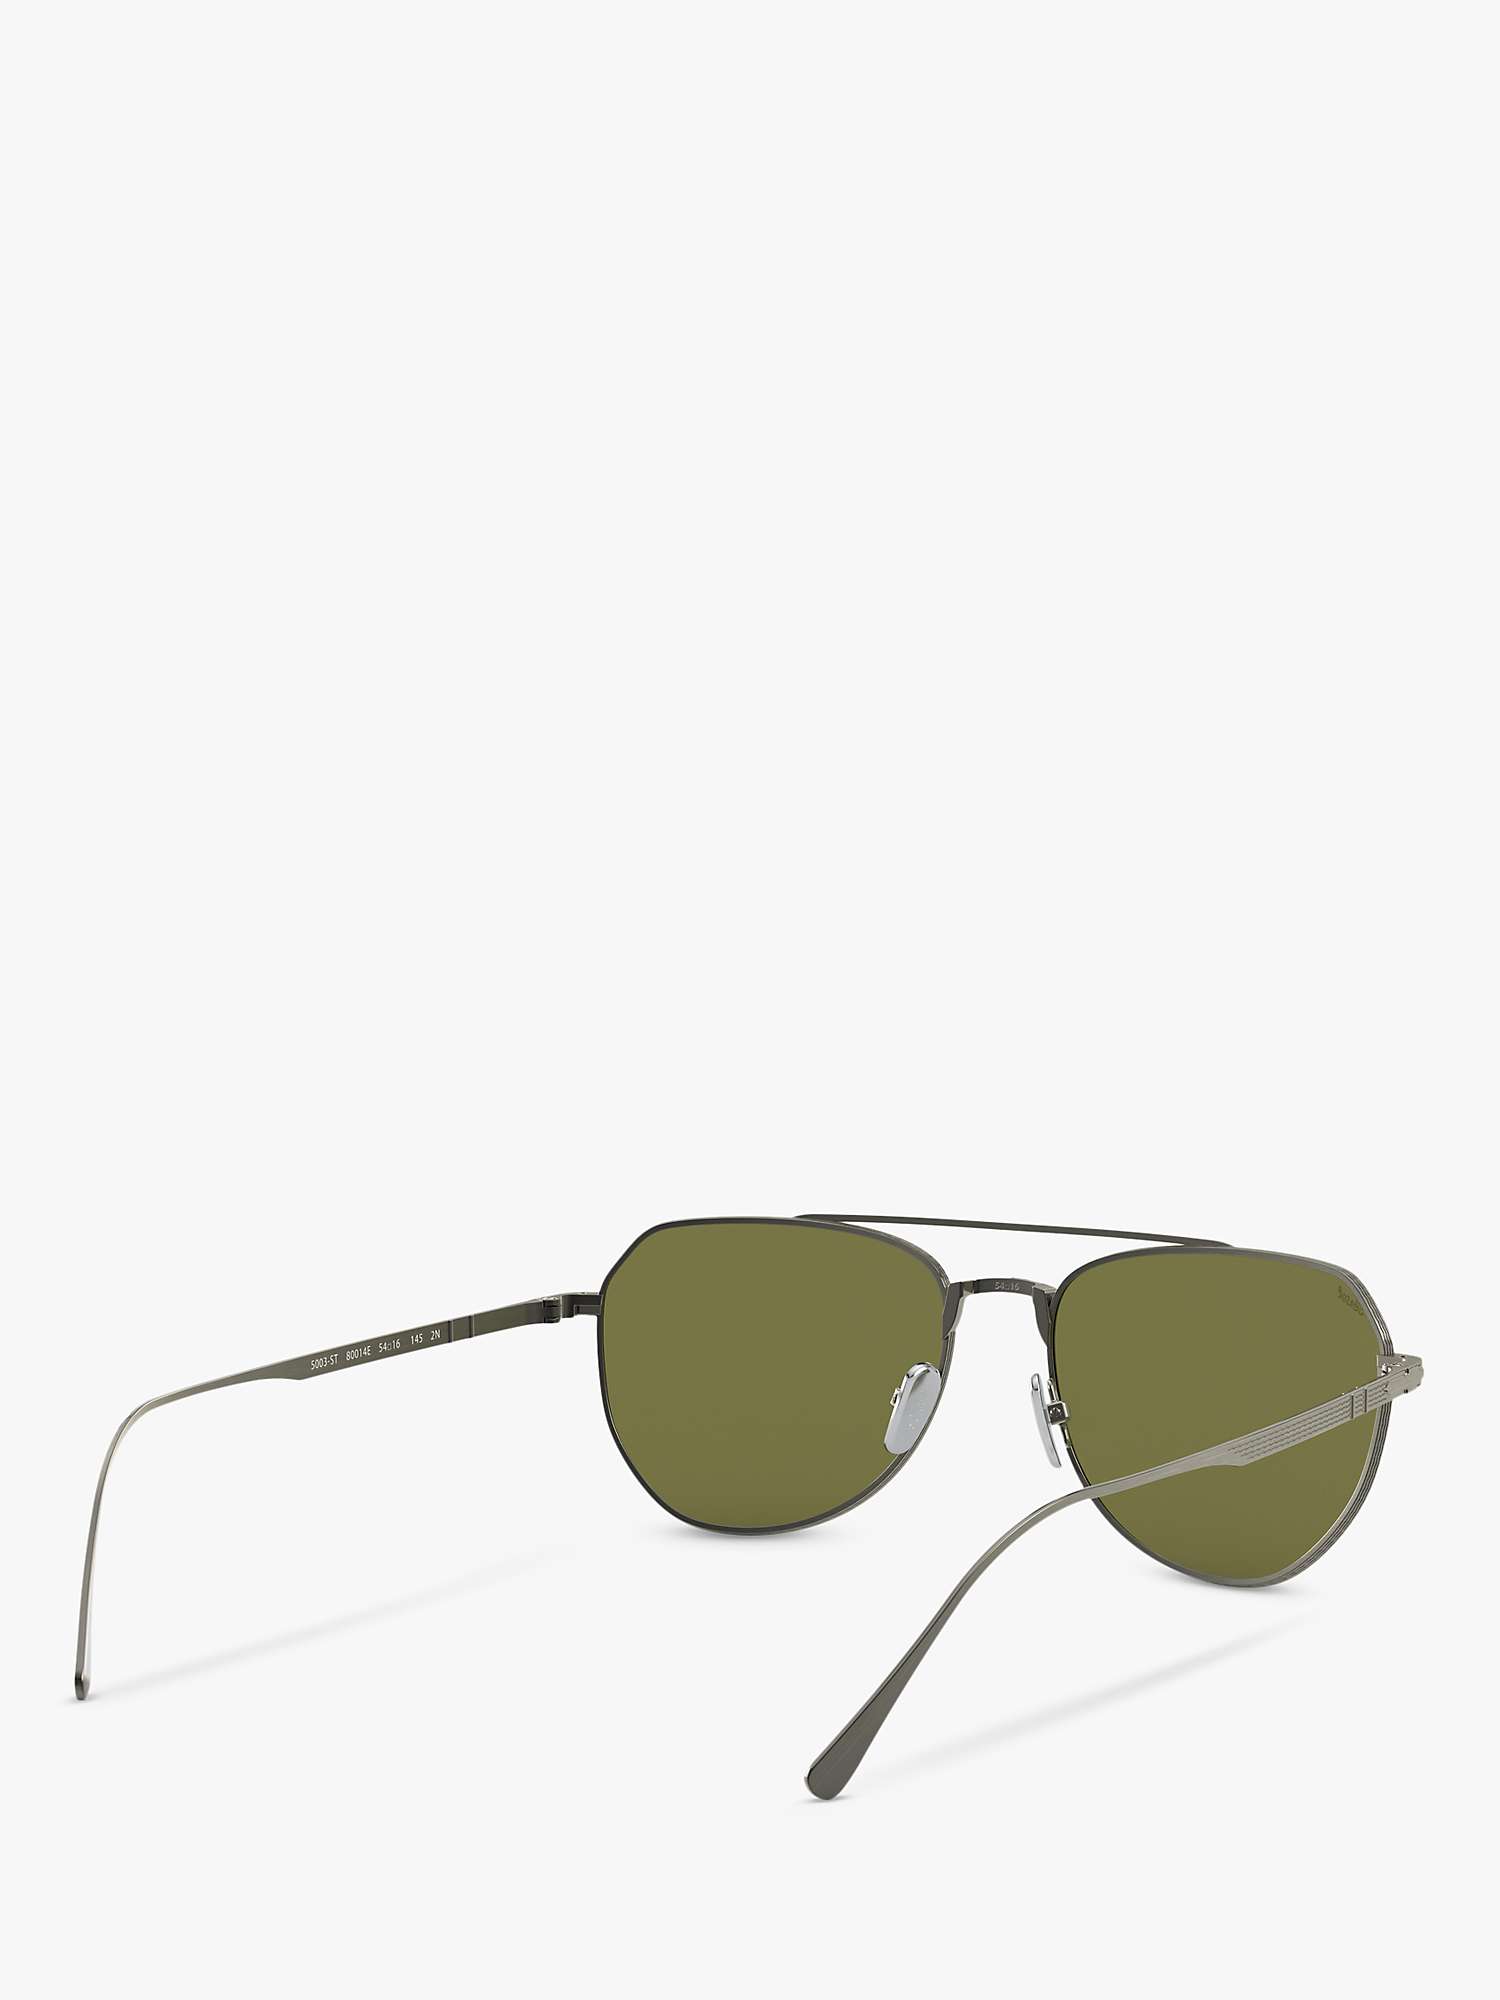 Buy Persol PO5003ST Unisex Oval Sunglasses Online at johnlewis.com